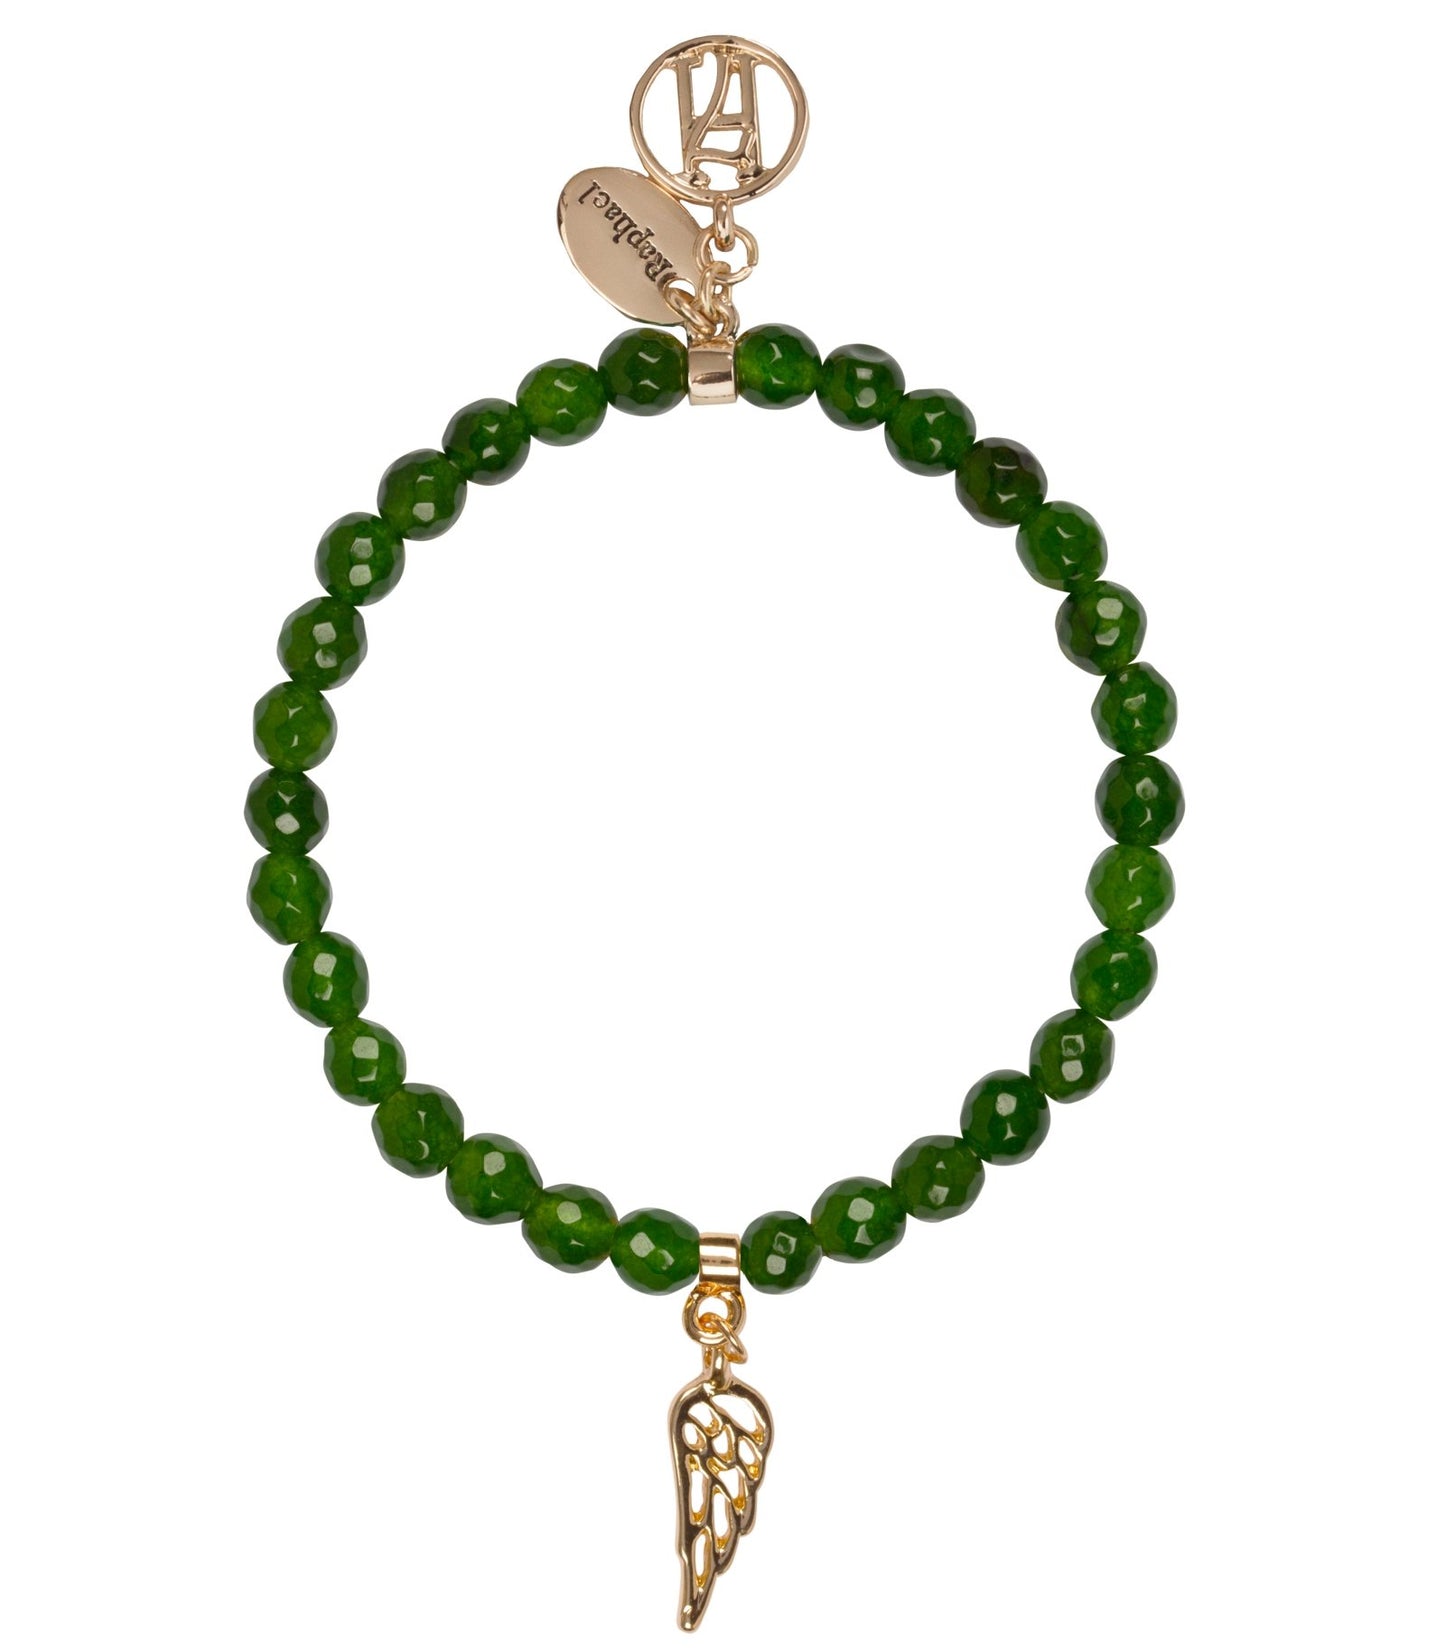 Angel Raphael green bracelet with Wing charm for Healing, Travel & Guidance Wing Charm